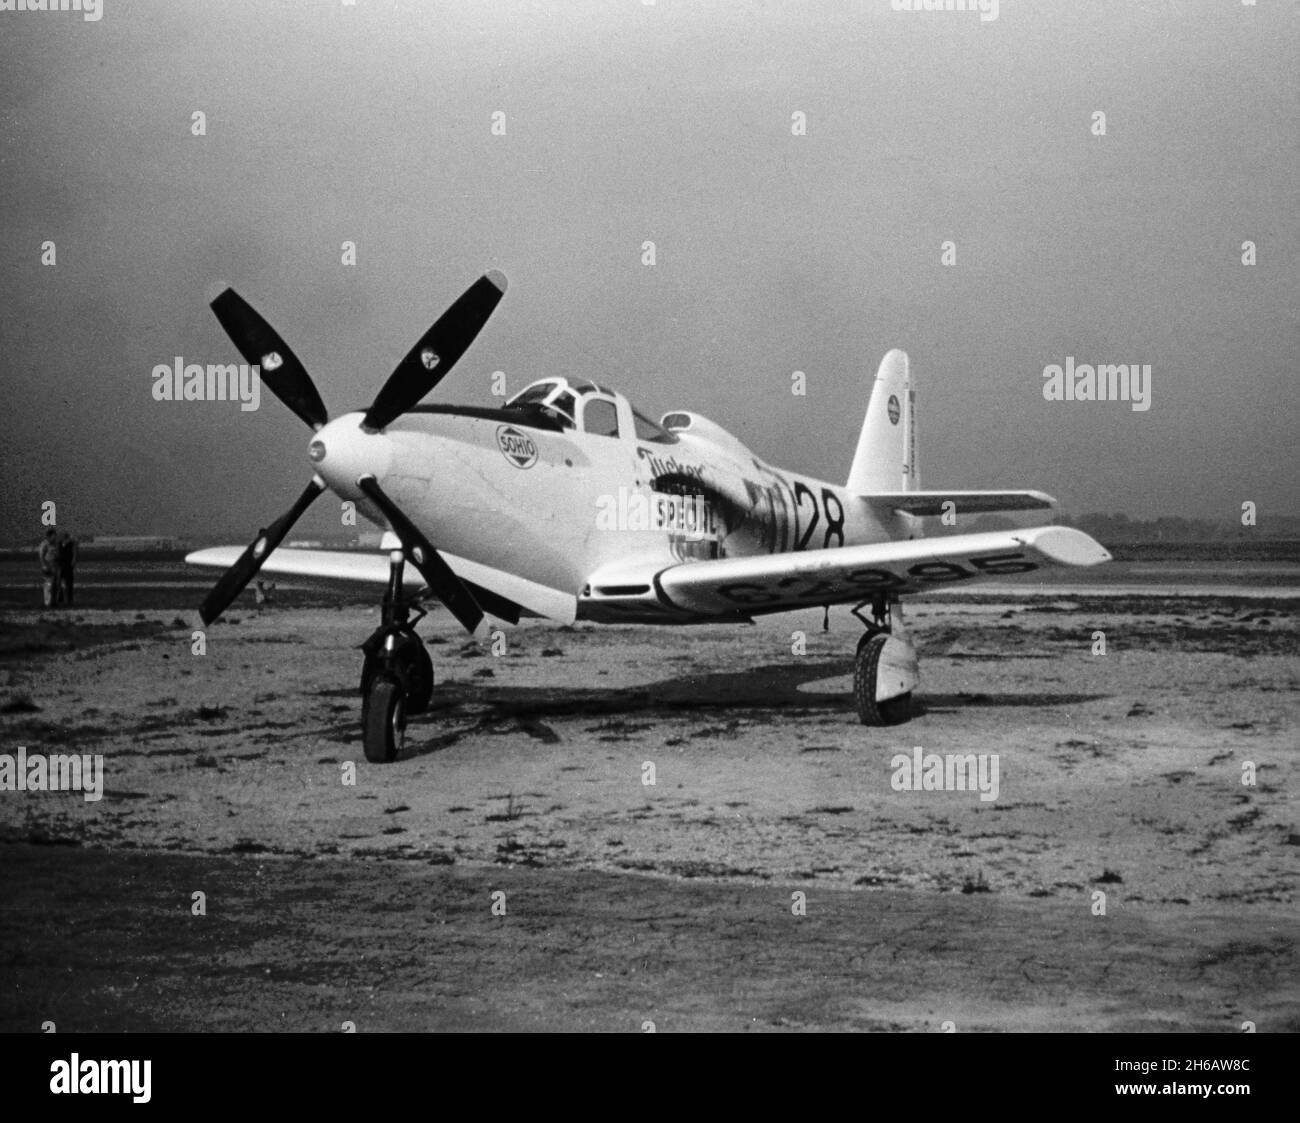 Vintage photograph taken in September 1948 at Cleveland, Ohio, USA. Photo shows an aircraft at an Airshow or Air Race. A Bell P-63C King Cobra, serial number N62995. A racer converted from a USAF fighter. Stock Photo